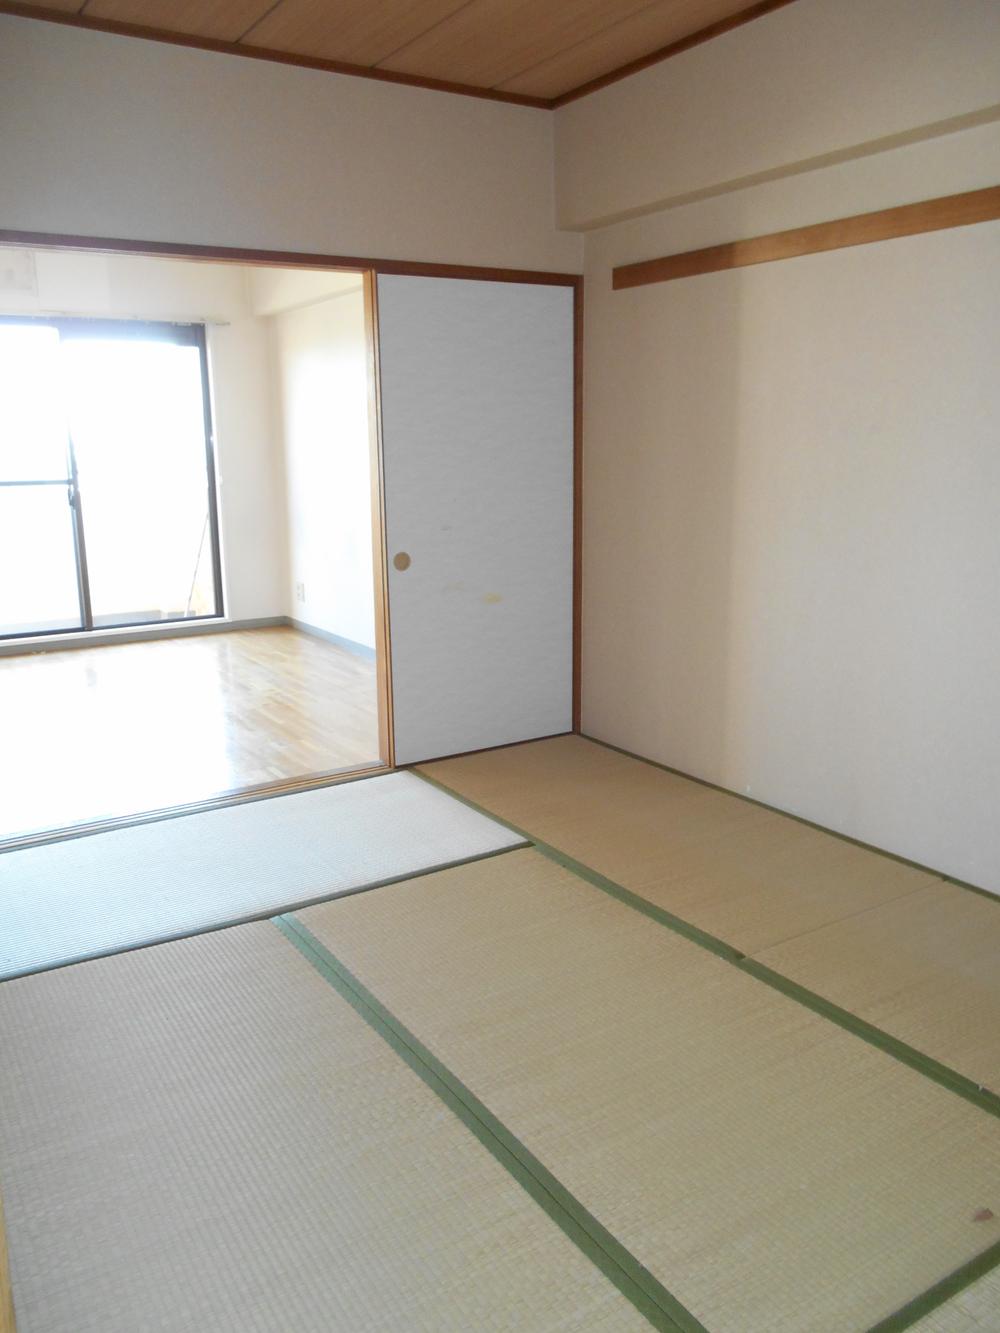 Non-living room. Living next to the Japanese-style room 6 quires